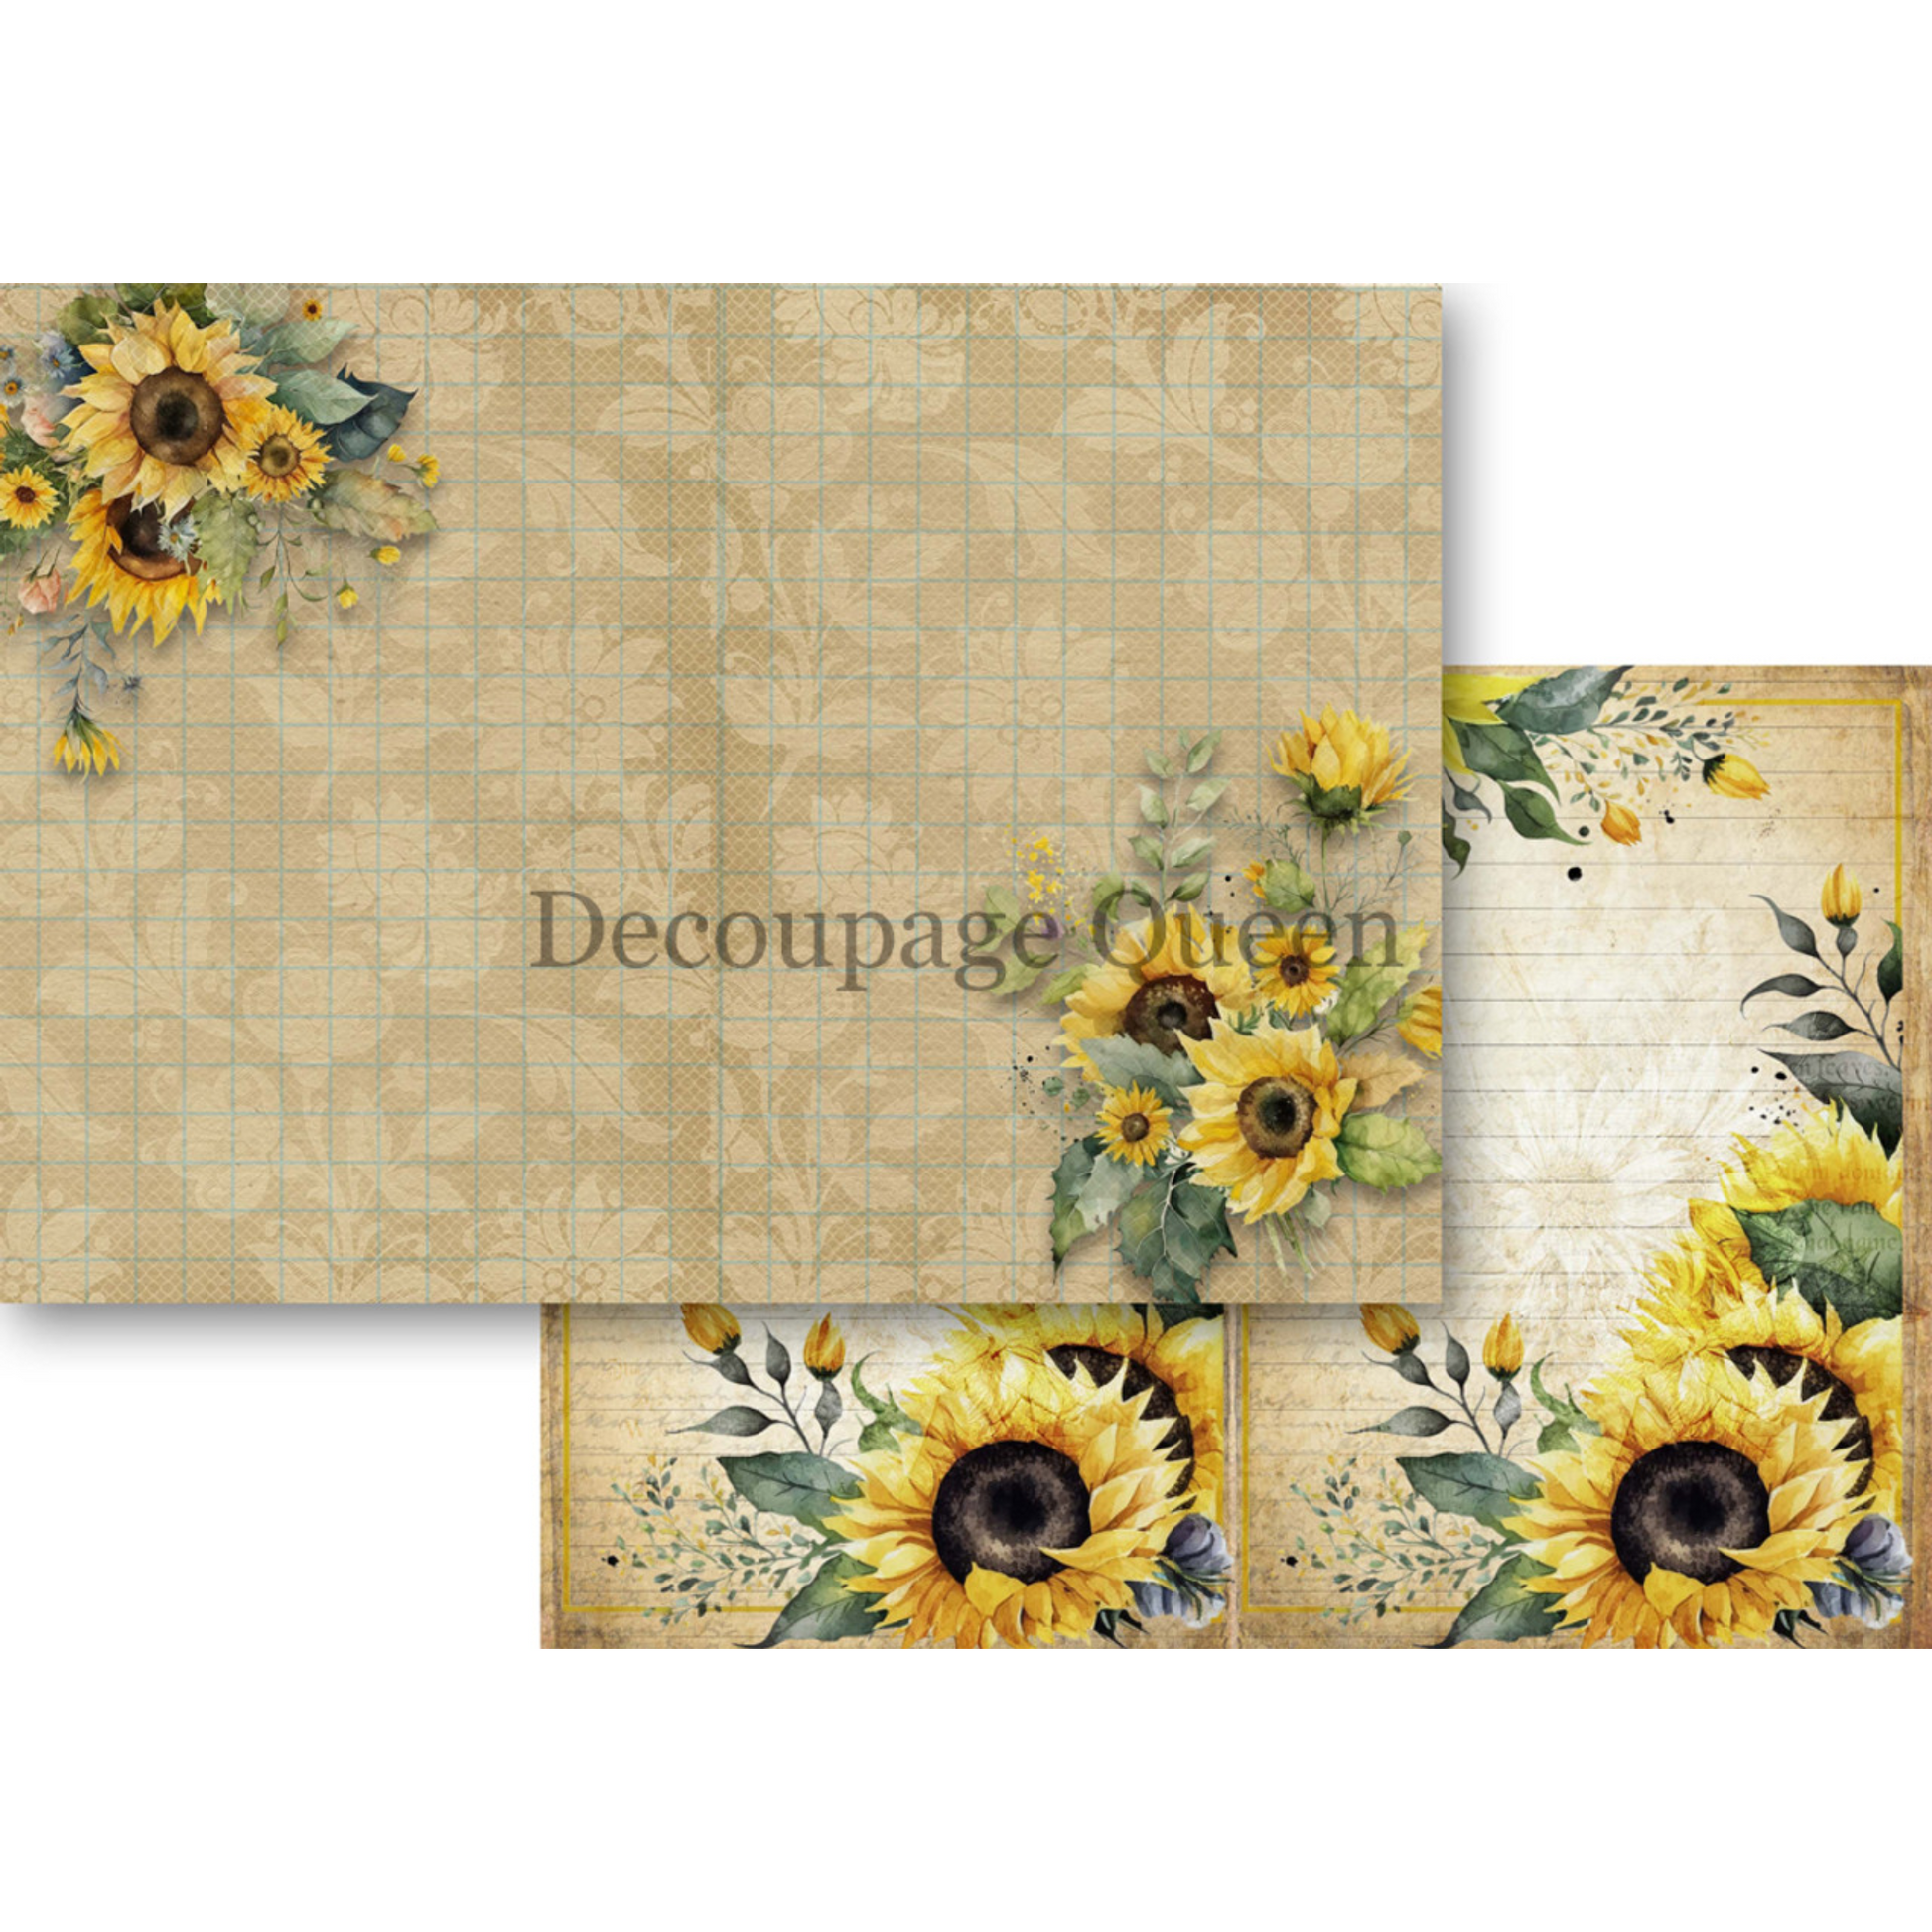 "Sunflower Ephemera Journal Kit" by Decoupage Queen.  Page 4. Available at Milton's Daughter.